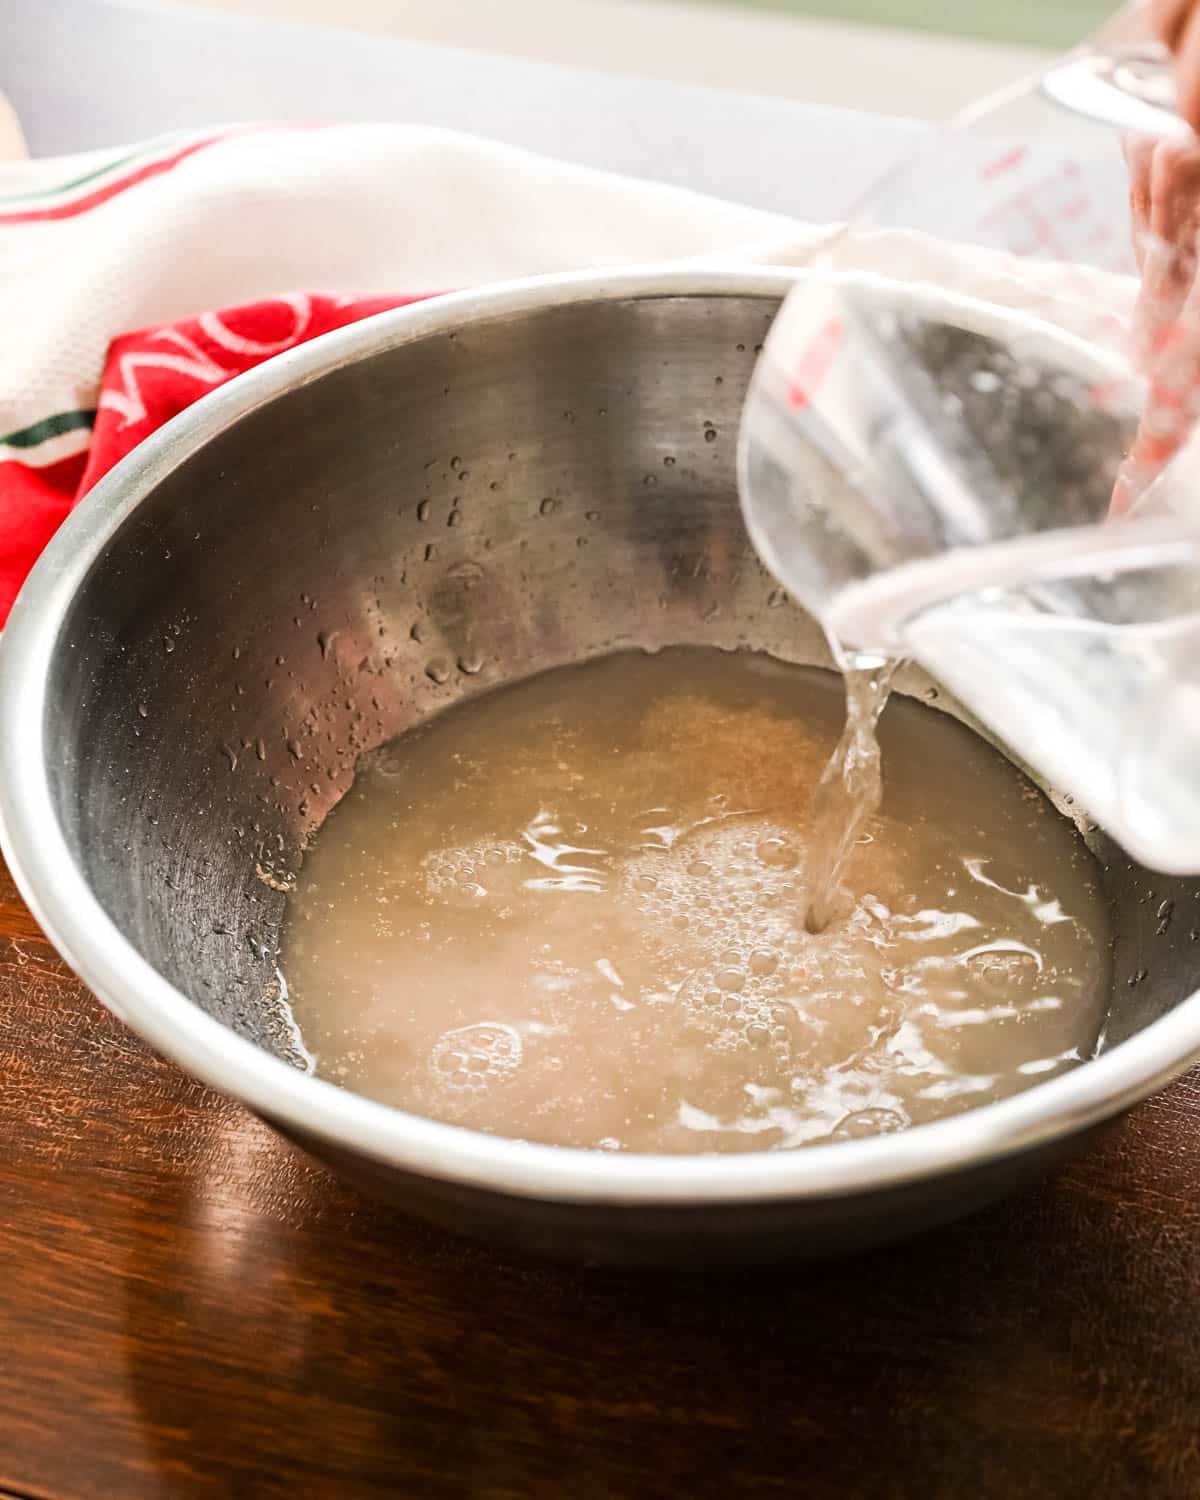 Adding water to the yeast.